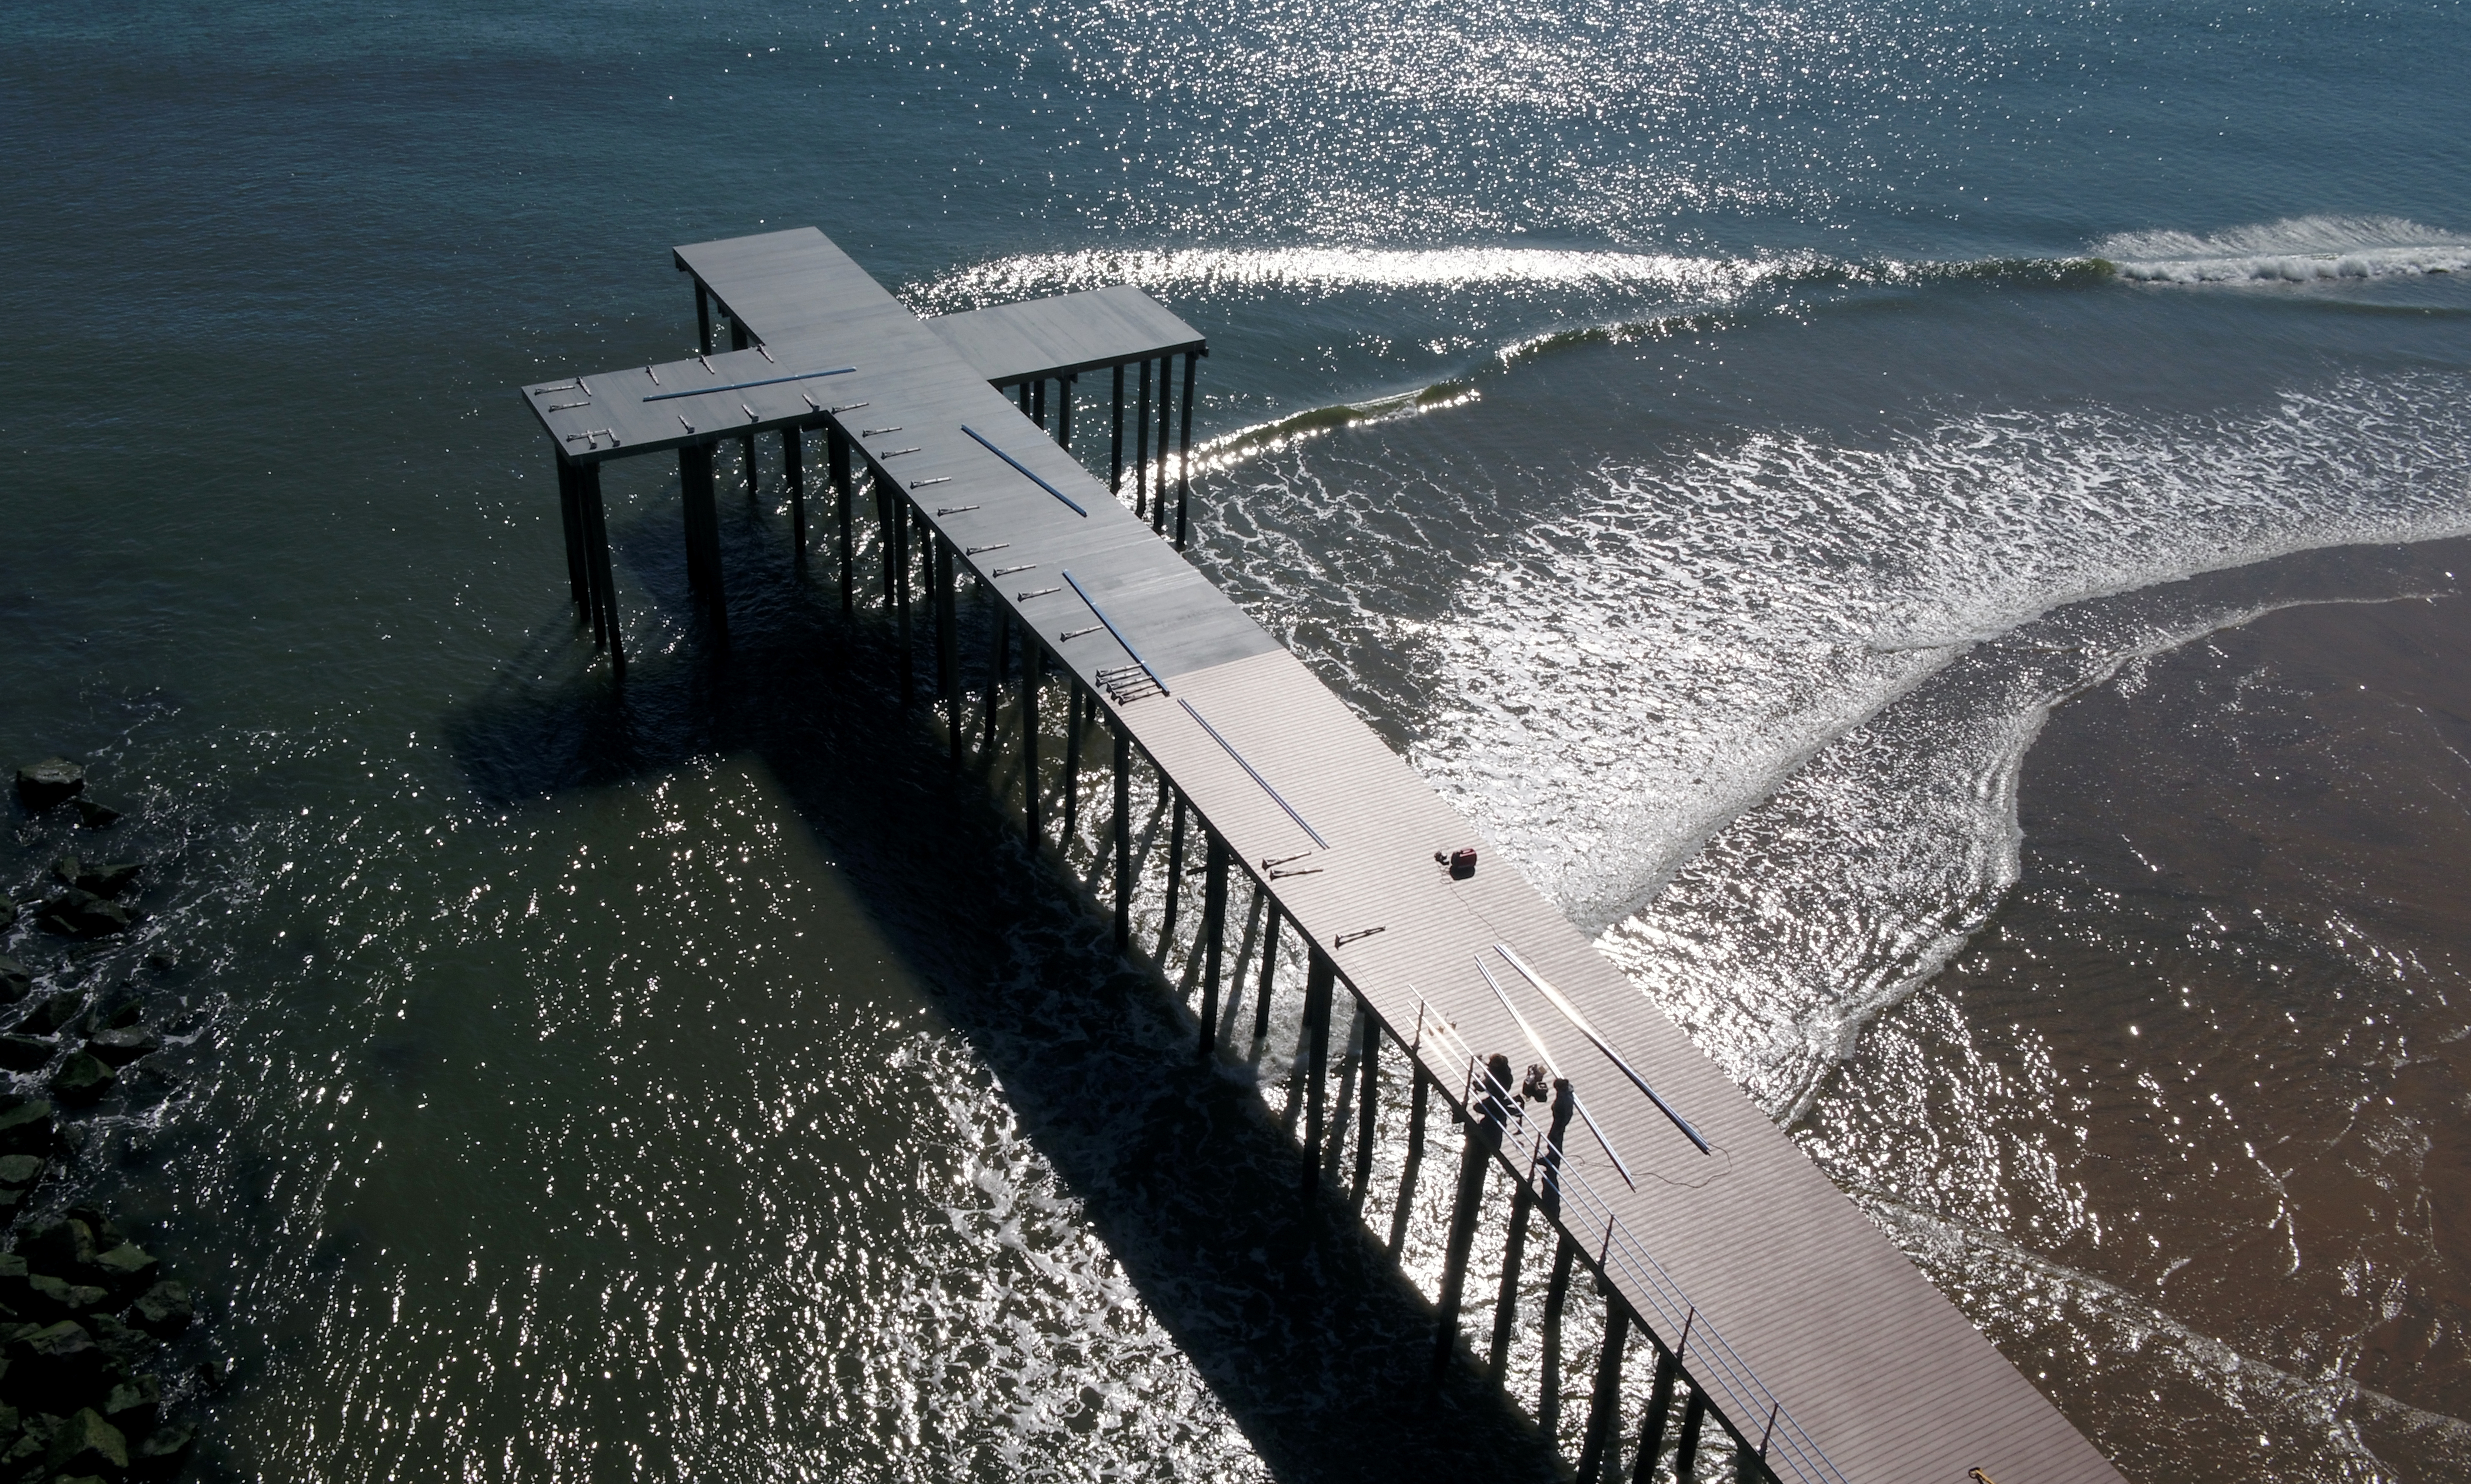 Controversial cross-shaped pier at Jersey Shore opens to the